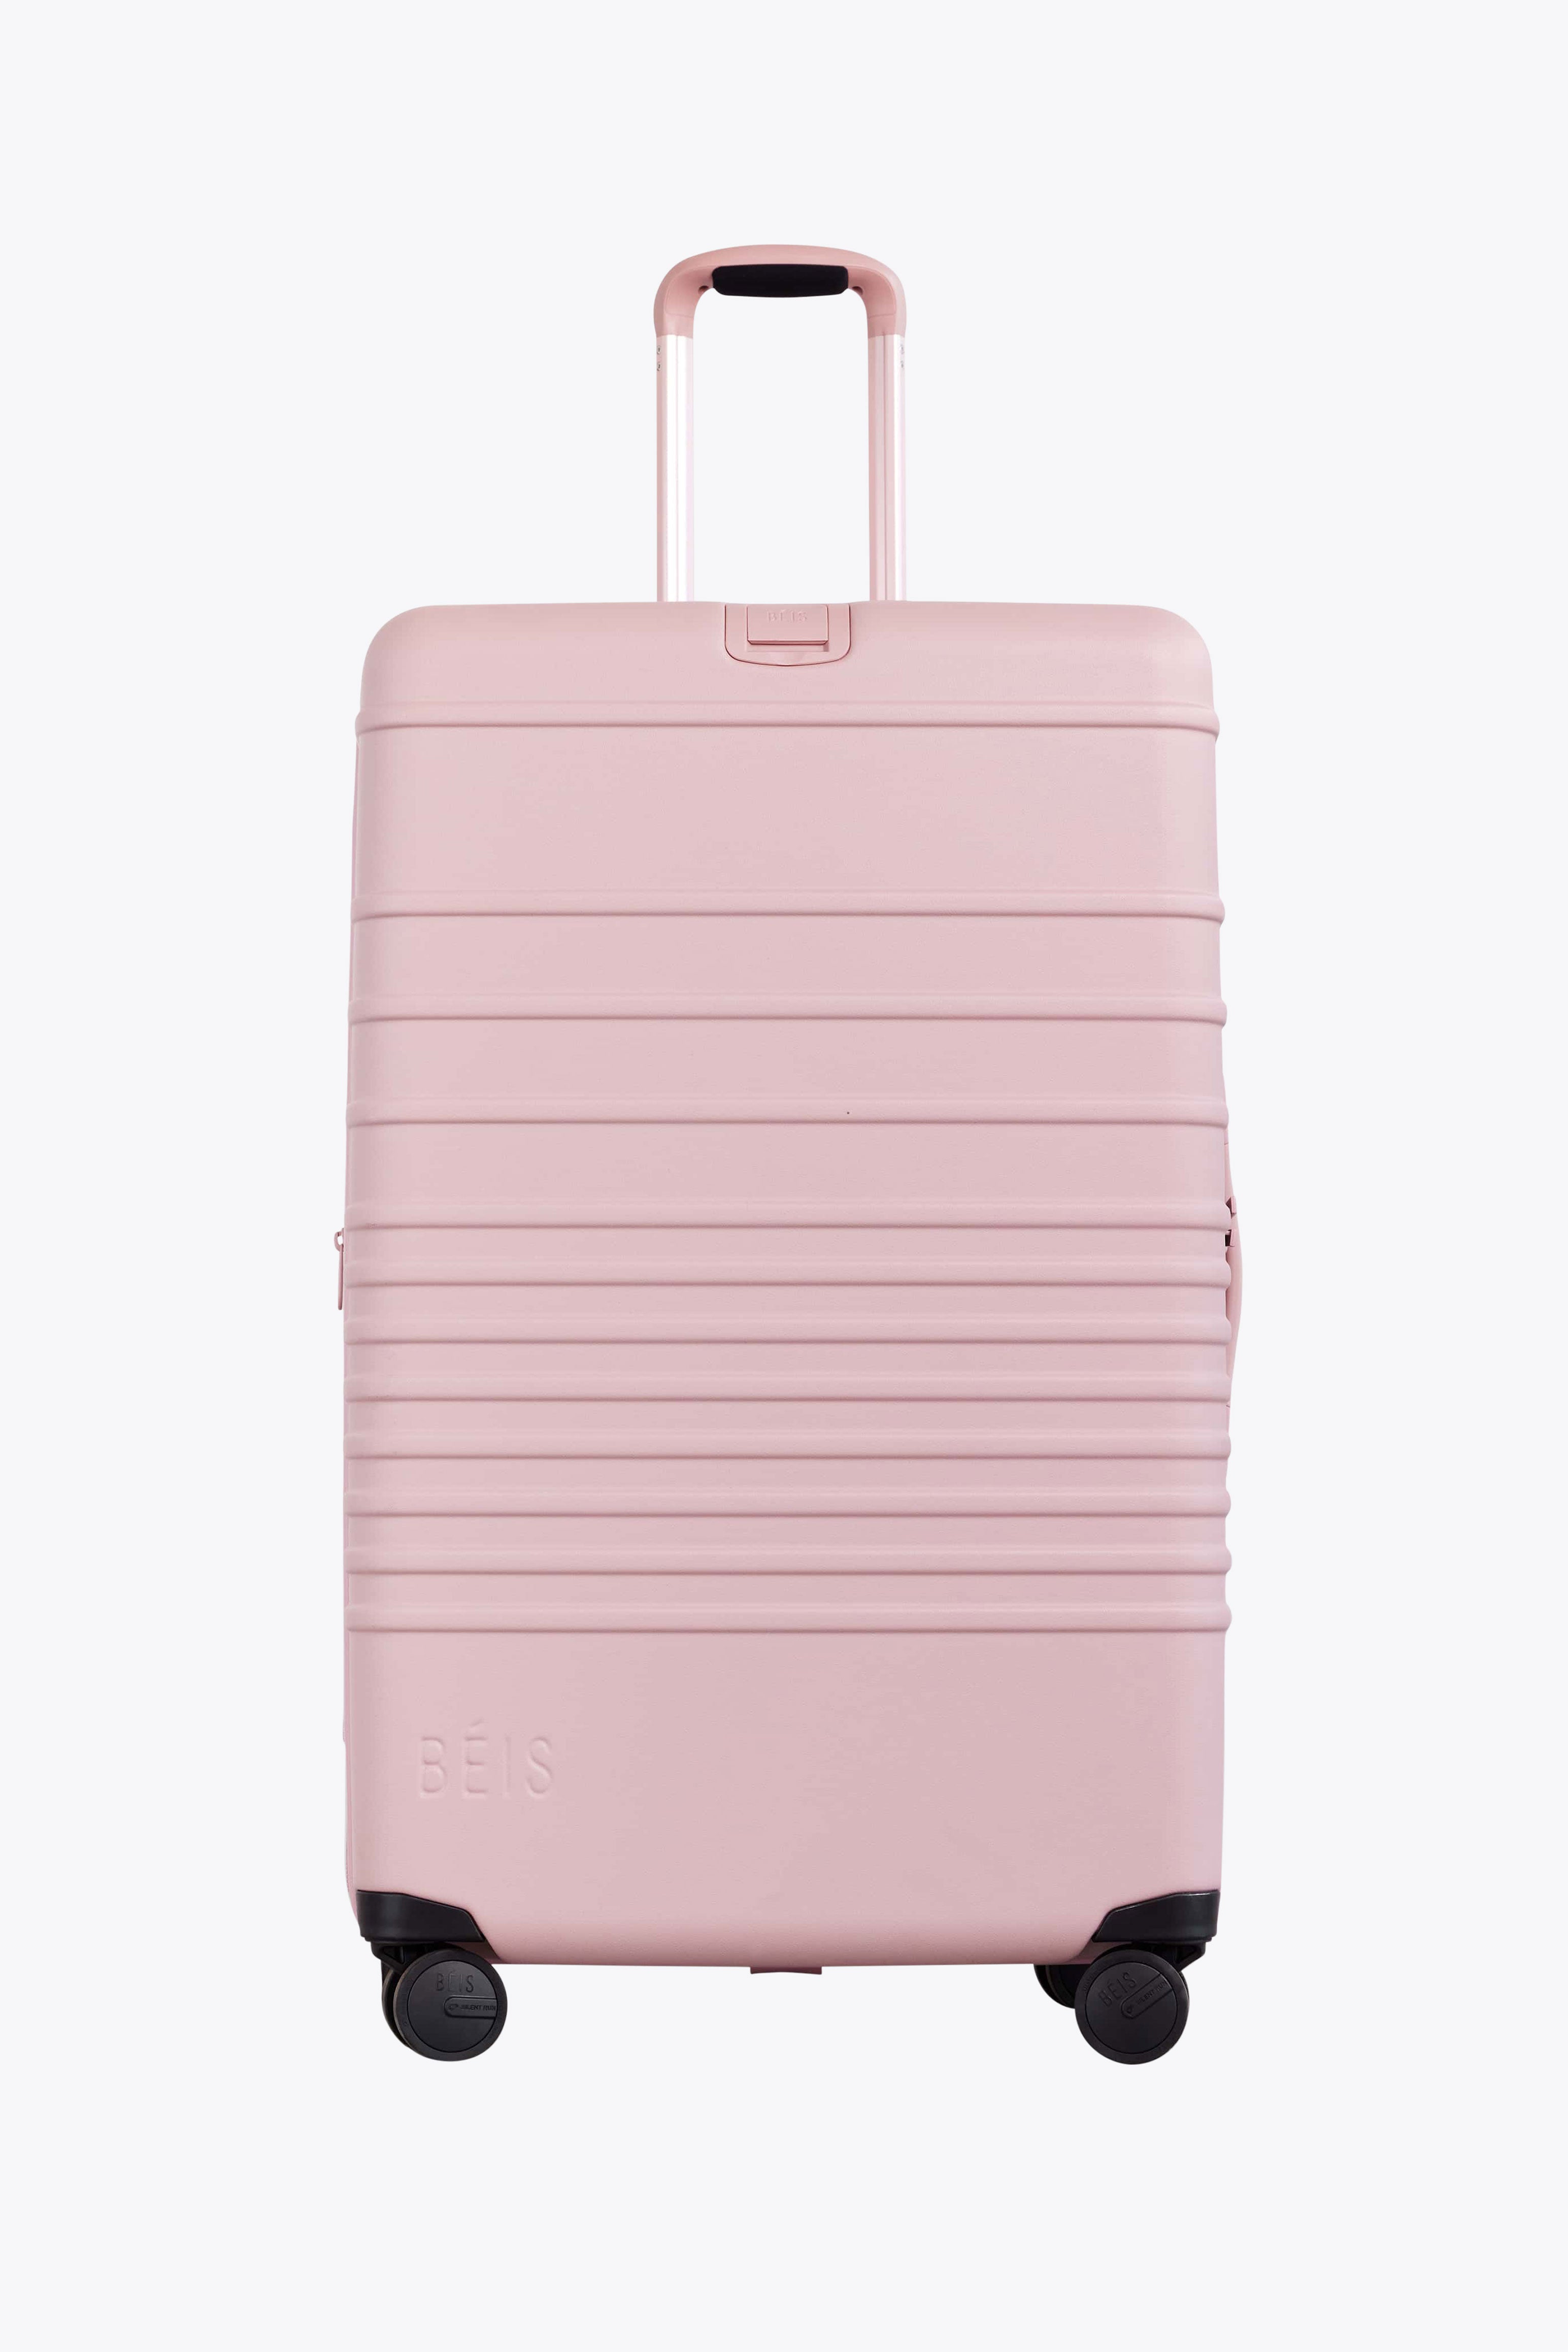 BÉIS 'The Large Check-In Roller' in Atlas Pink - 29 In Check In Pink Luggage